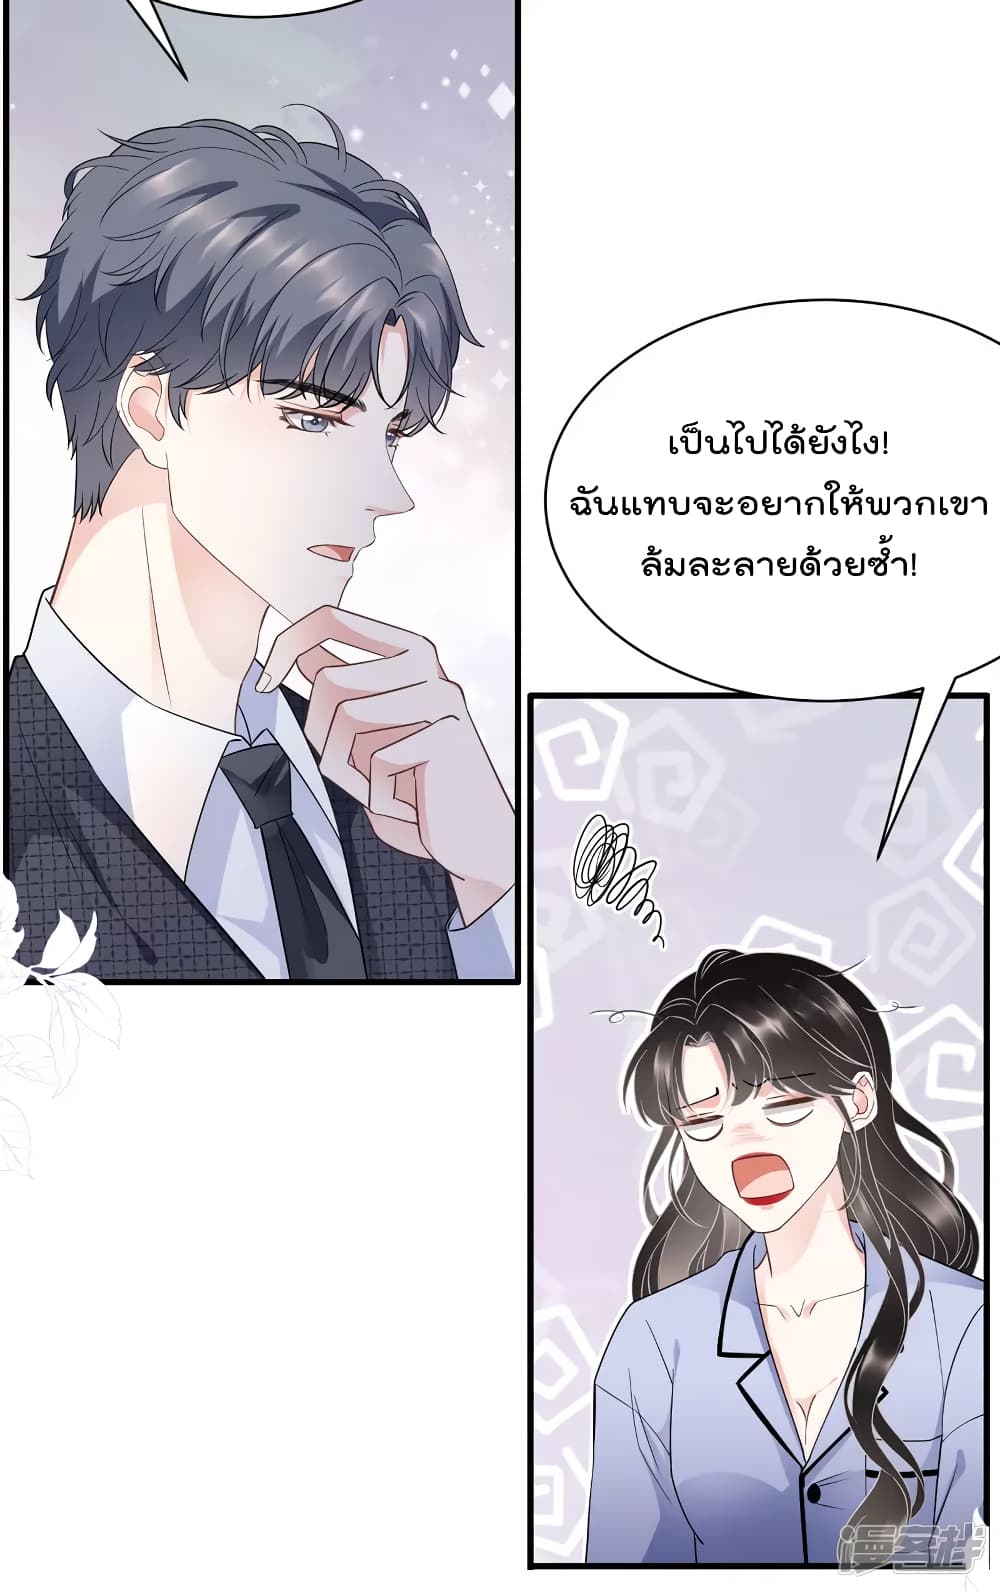 What Can the Eldest Lady Have คุณหนูใหญ่ ทำไมคุณร้ายอย่างนี้ 32-32